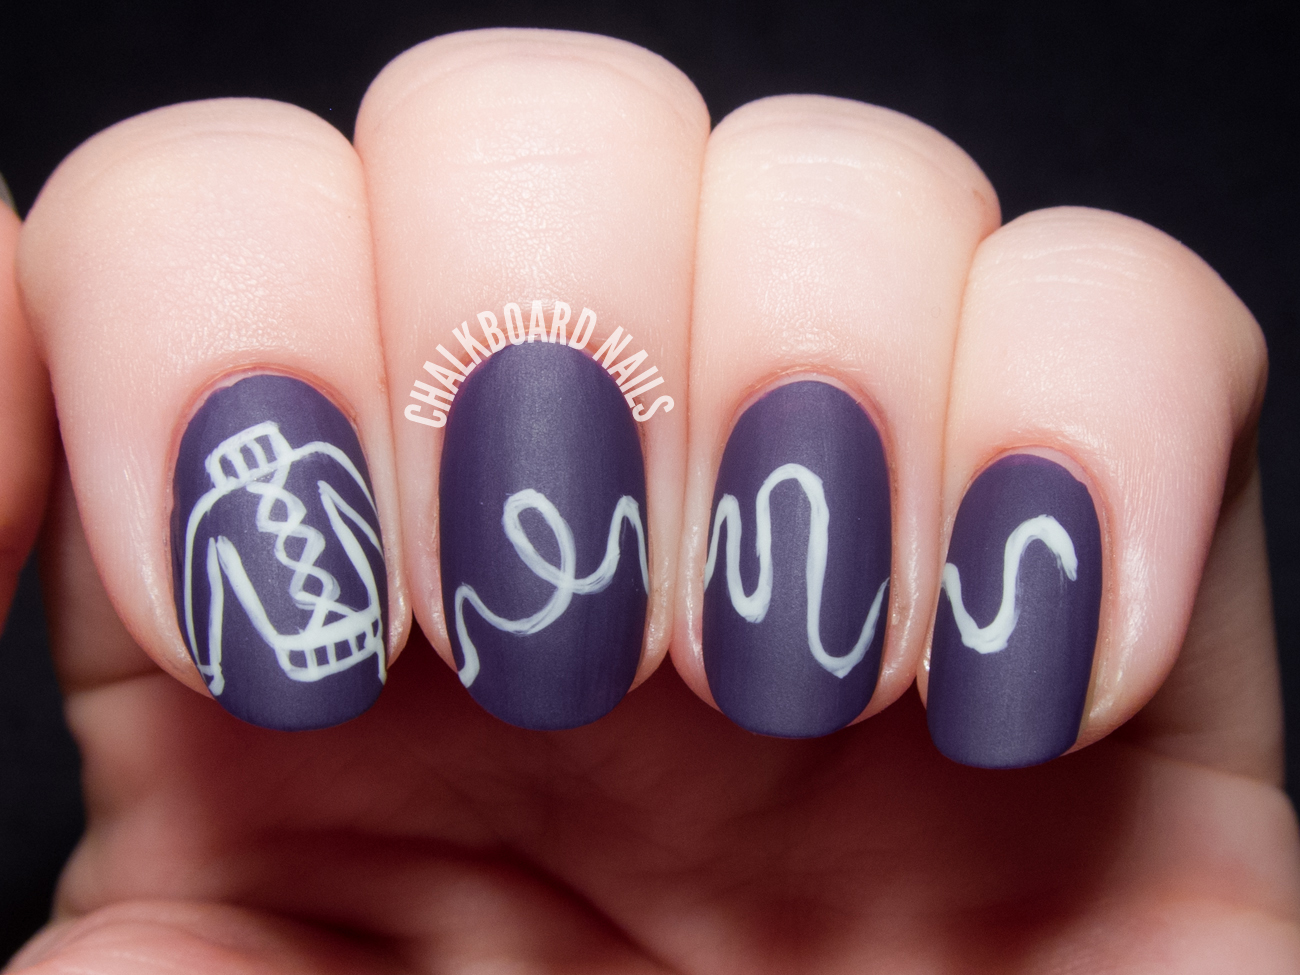 Undone - The Sweater Song nail art by @chalkboardnails